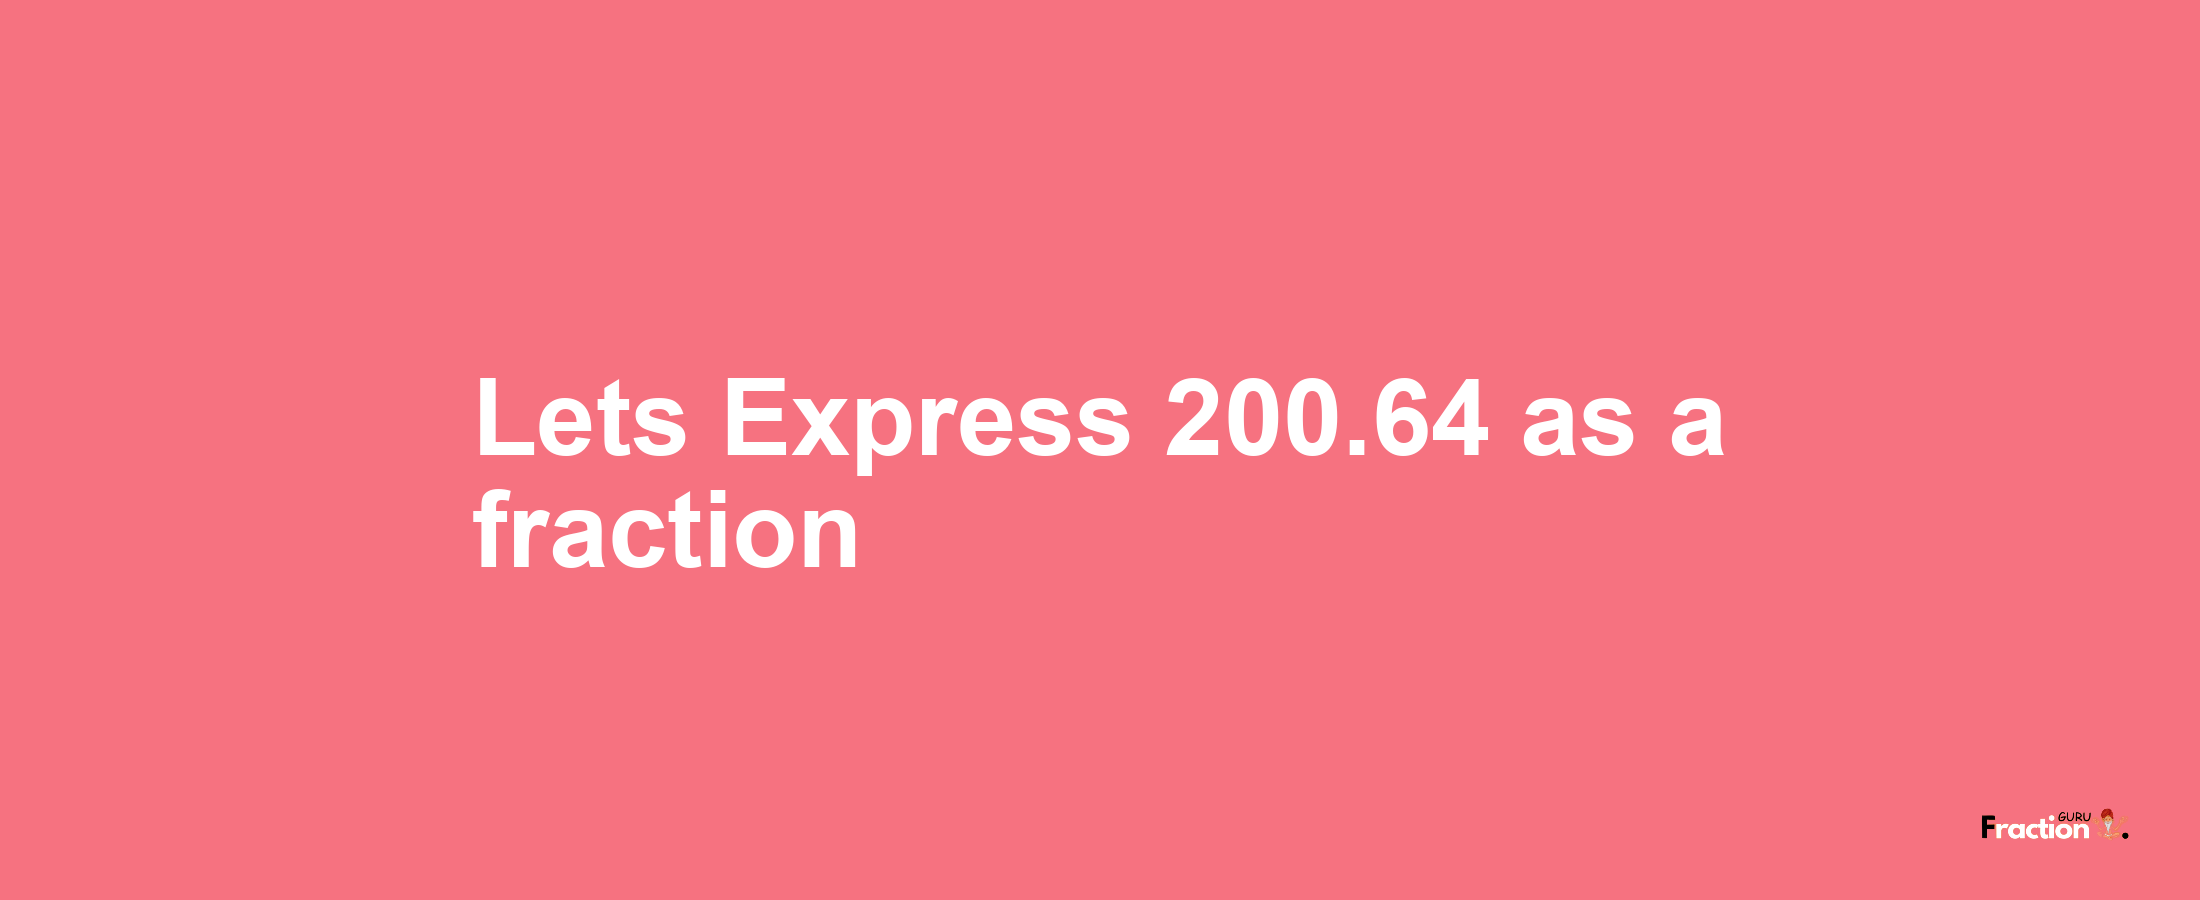 Lets Express 200.64 as afraction